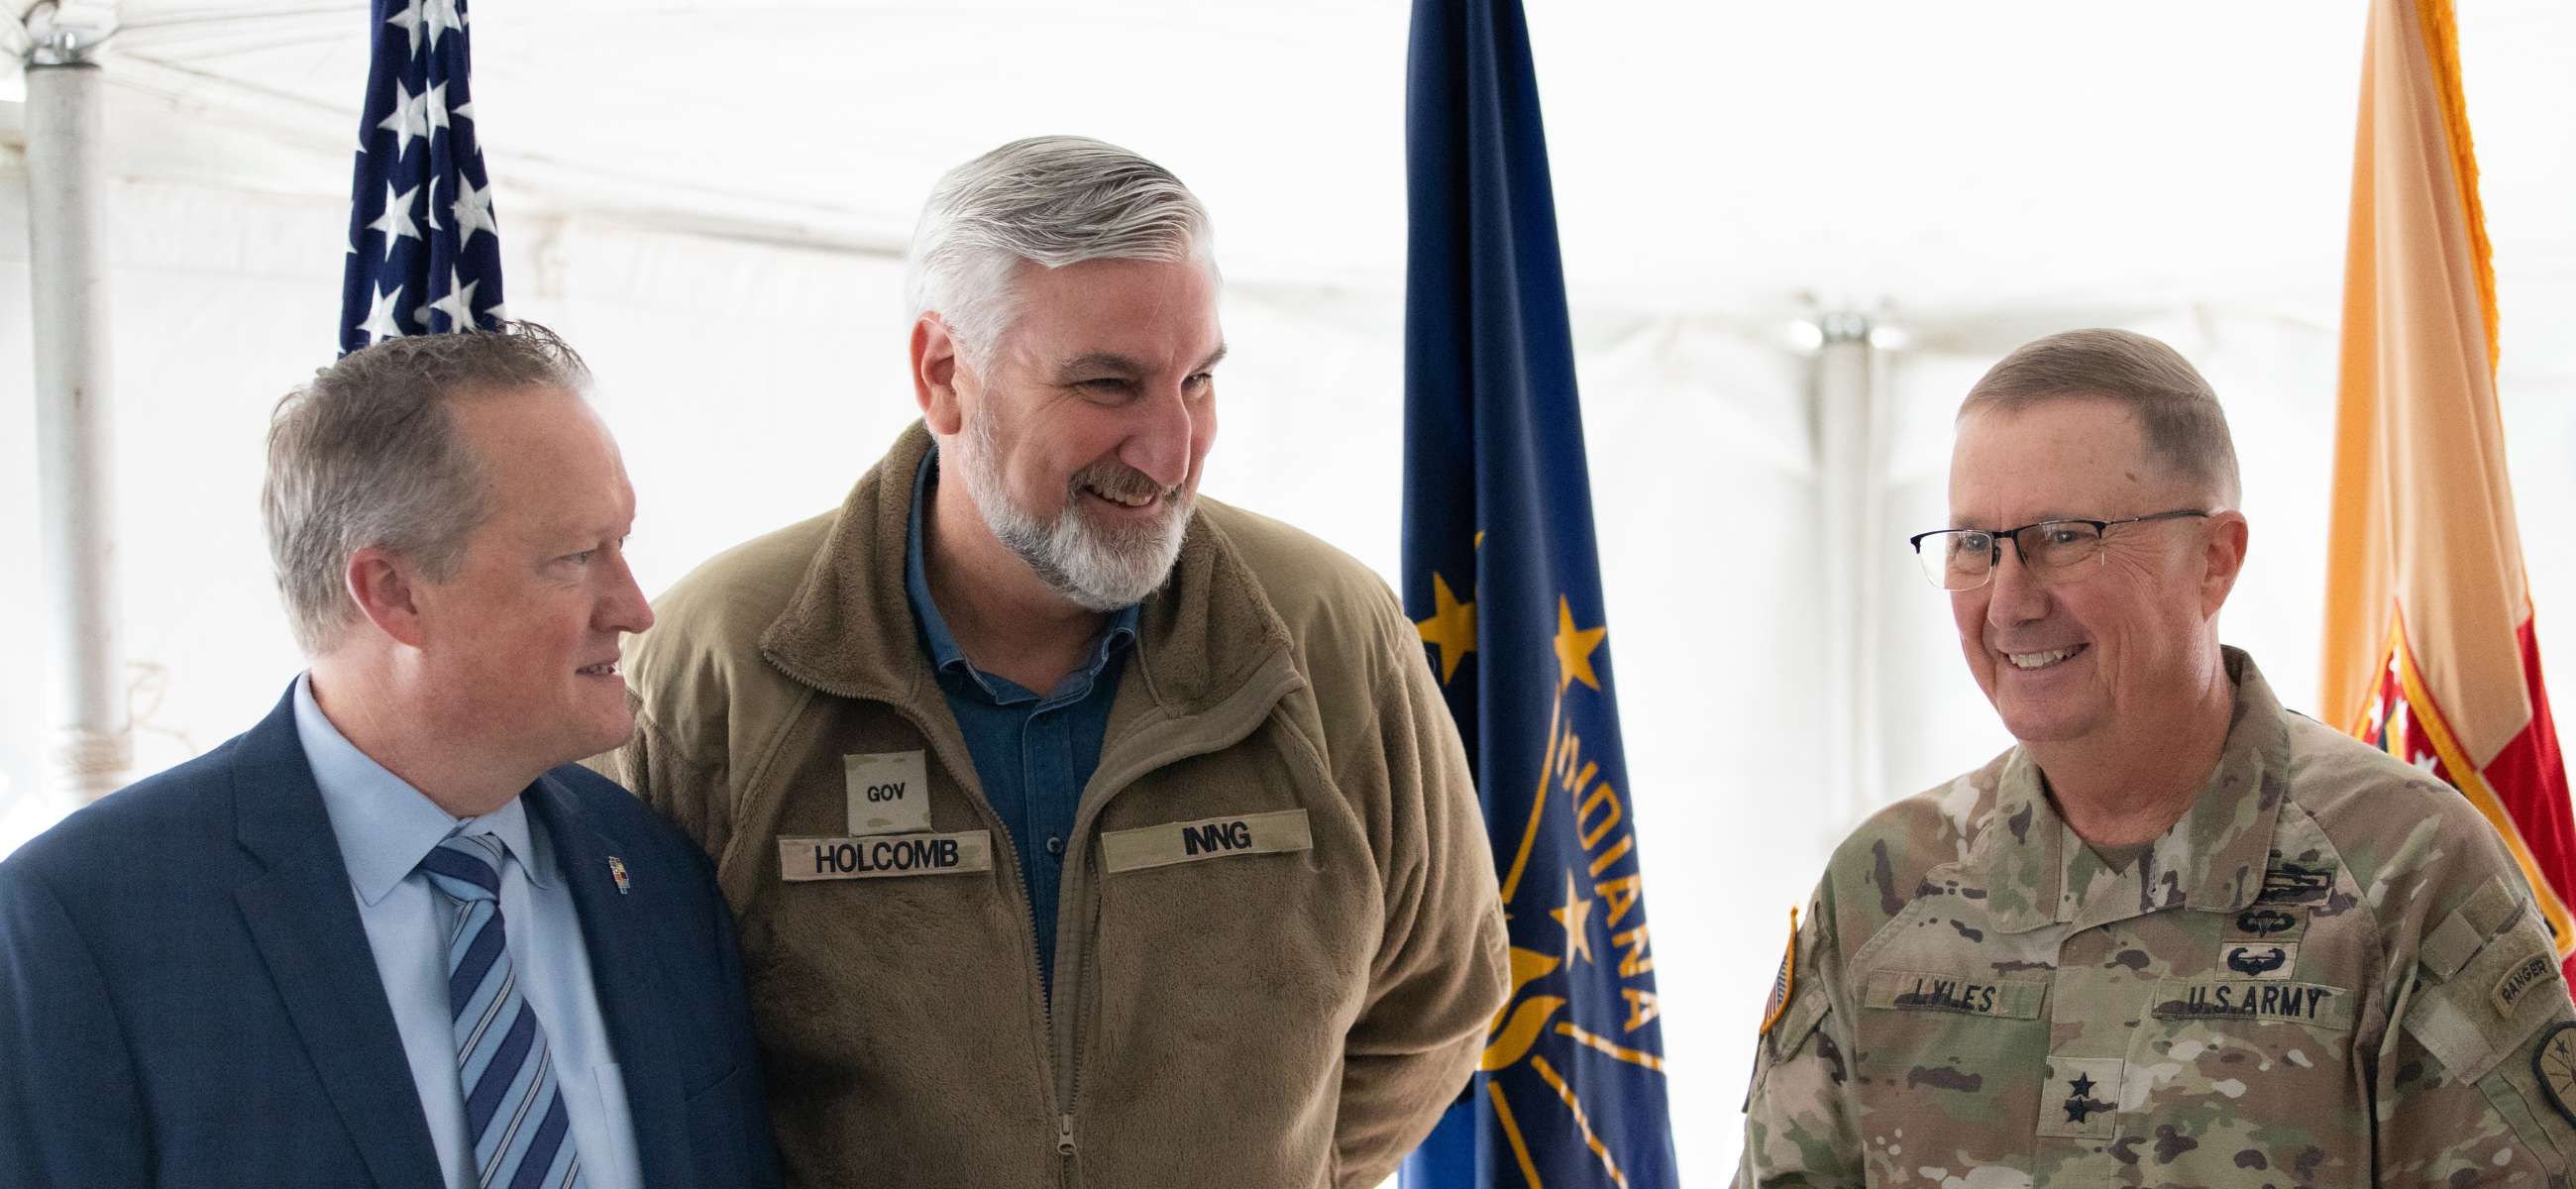 Gov. Holcomb with the Indiana national guard's general